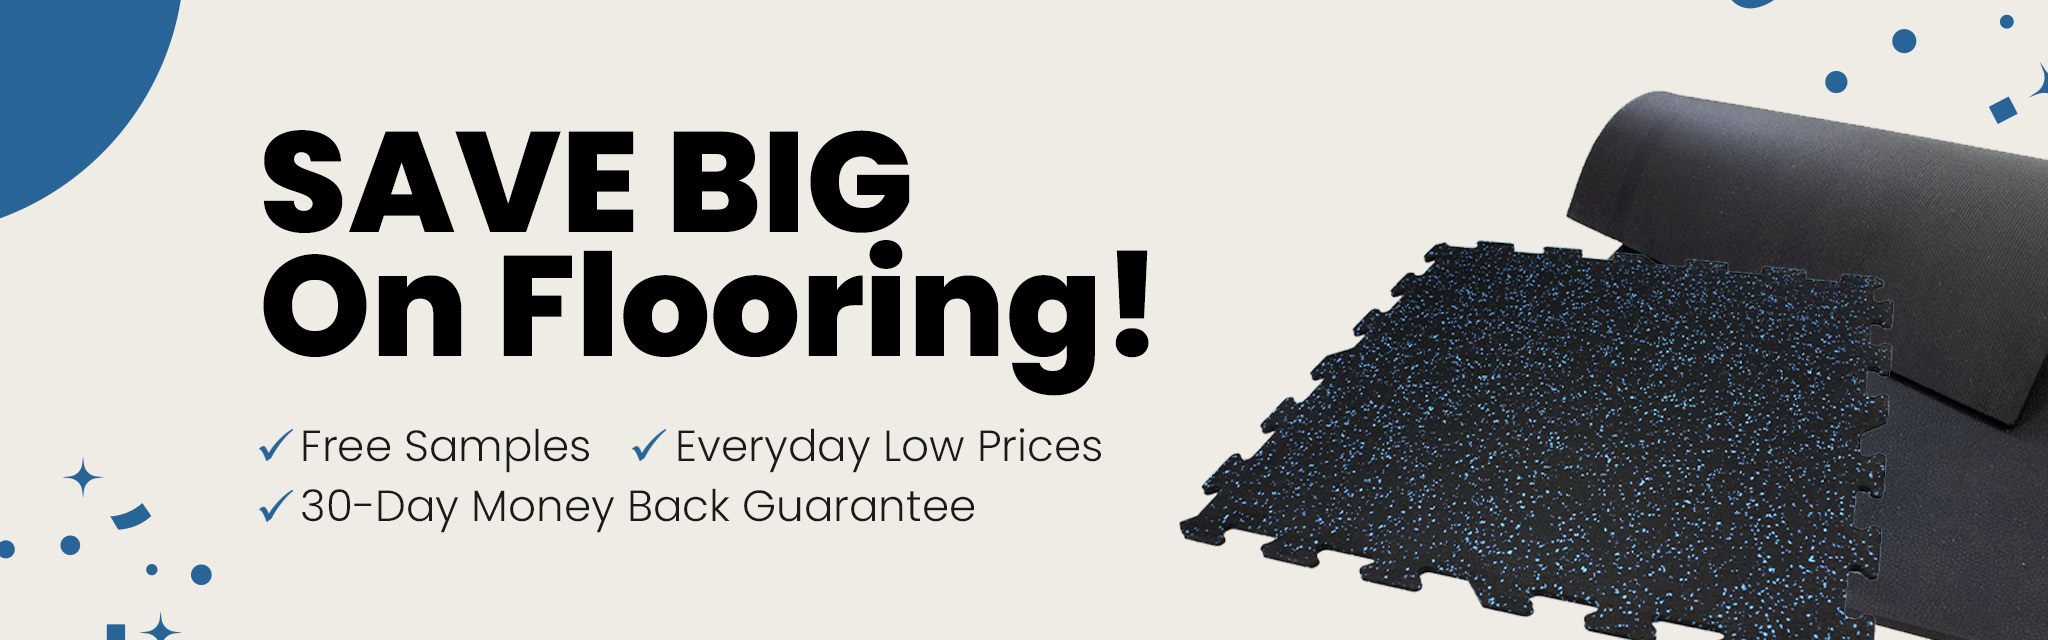 SAVE BIG on Flooring!
Free Samples, Everyday Low Prices, 30-Day Money Back Guarantee